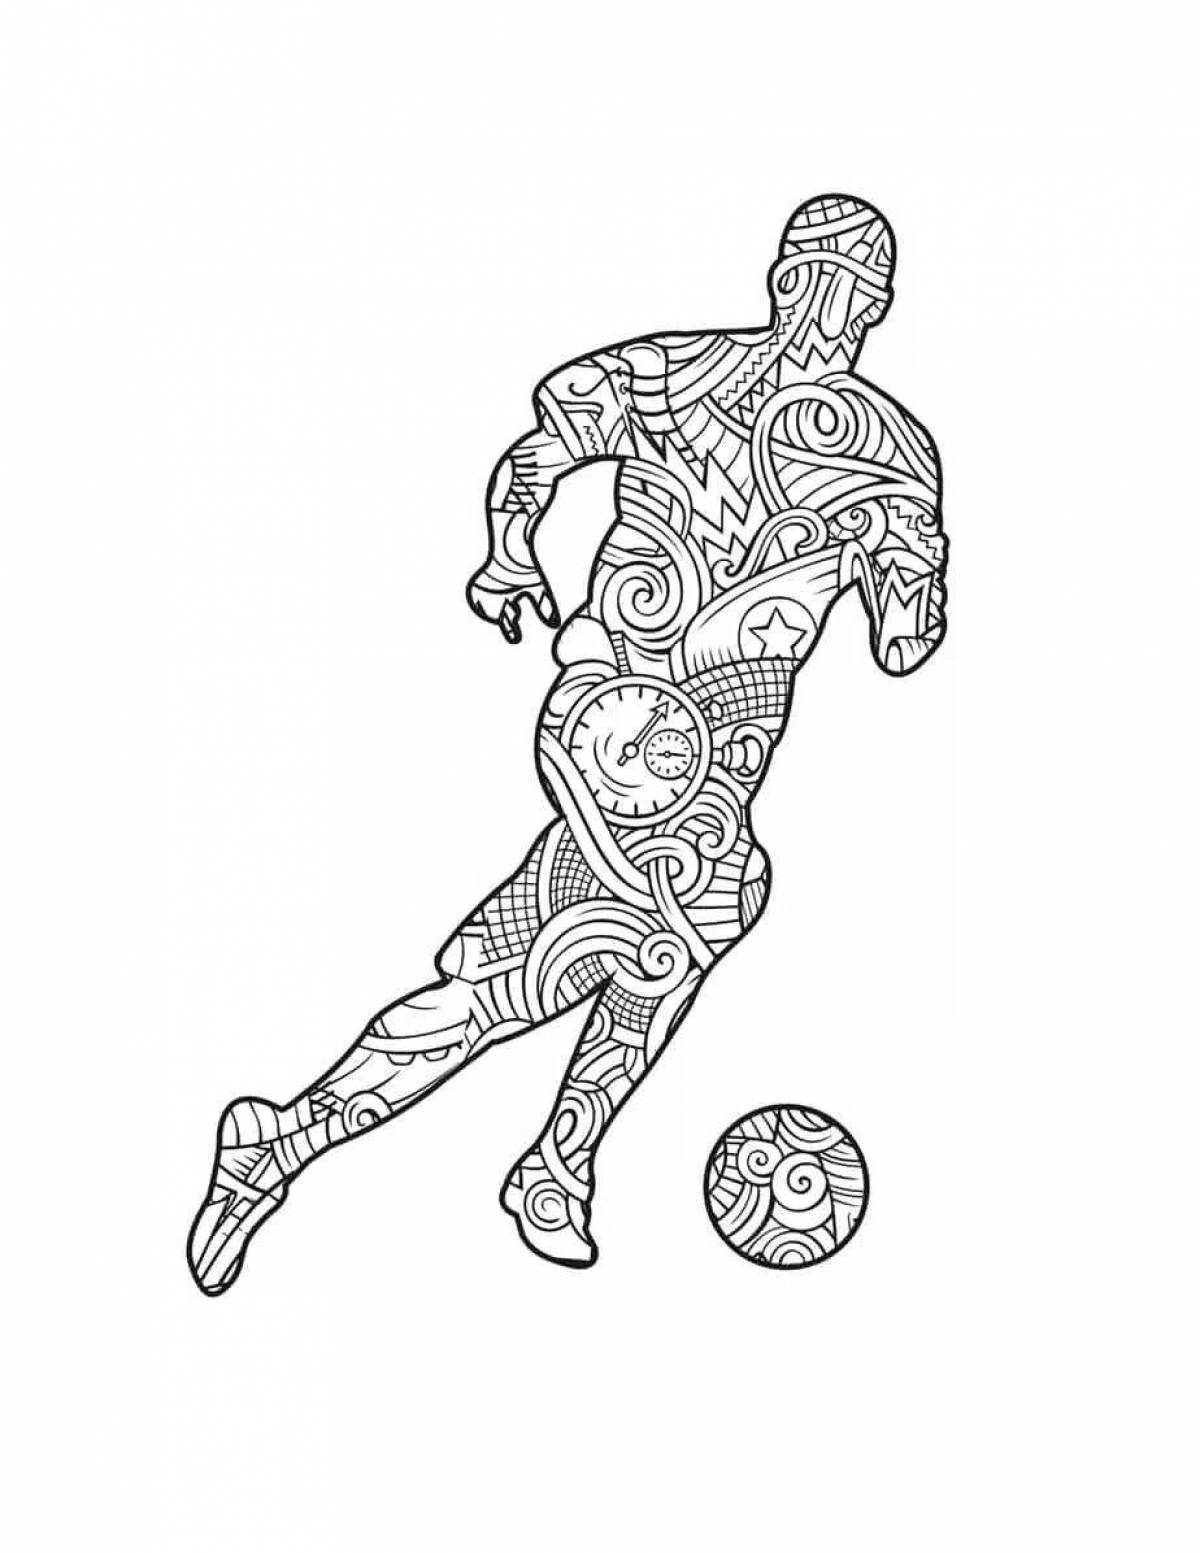 Playful world cup coloring page